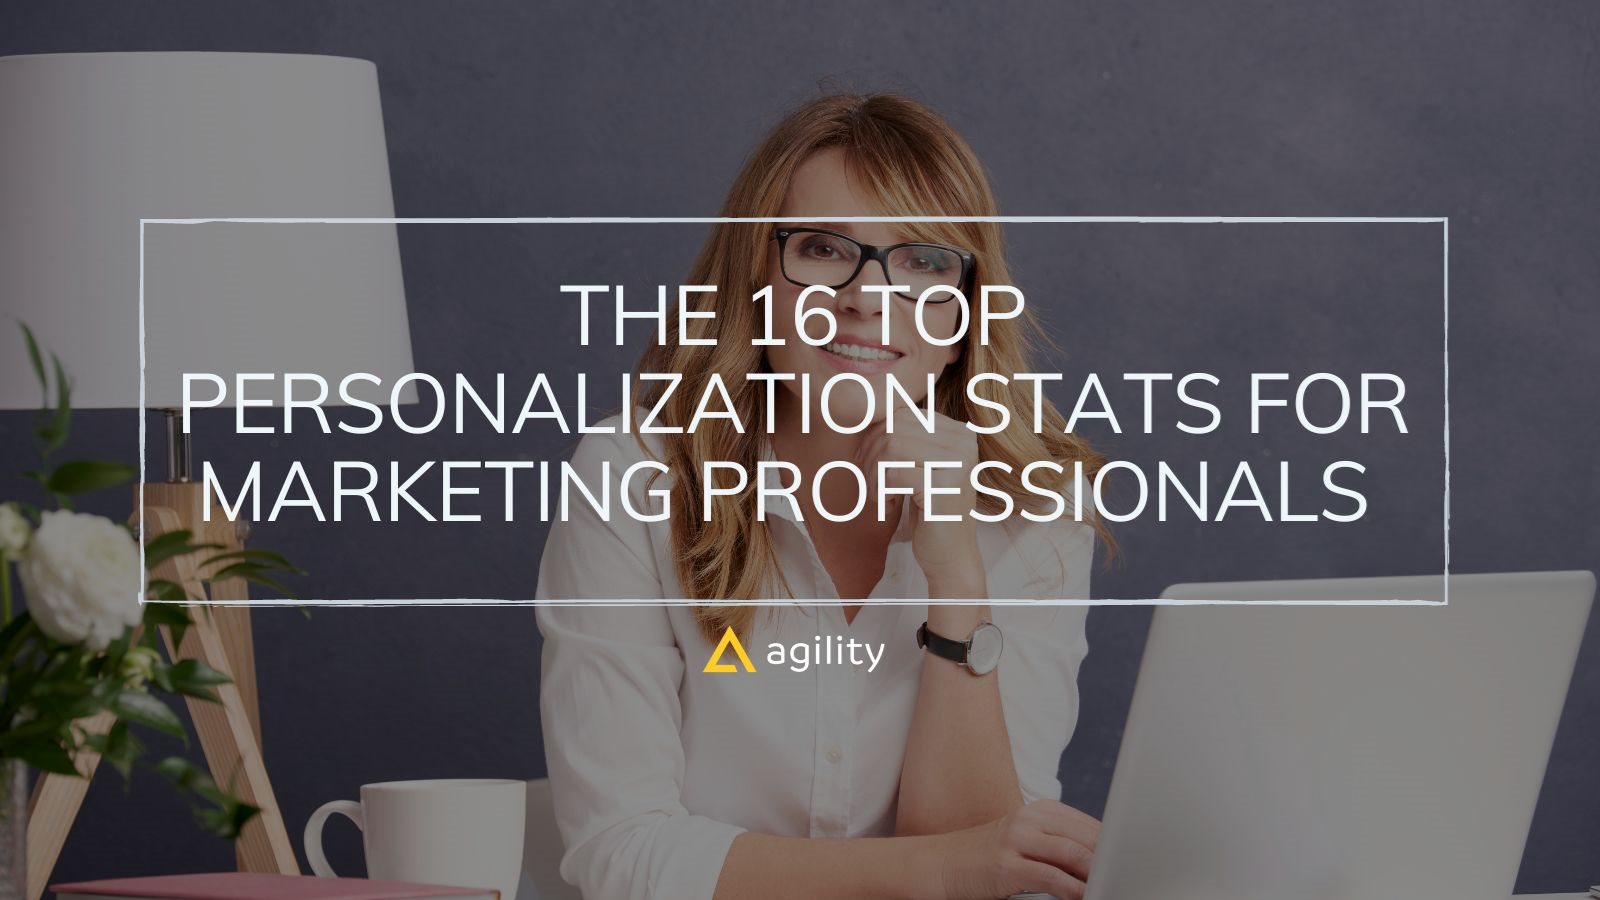 The 16 Top Personalization Stats for Marketing Professionals 